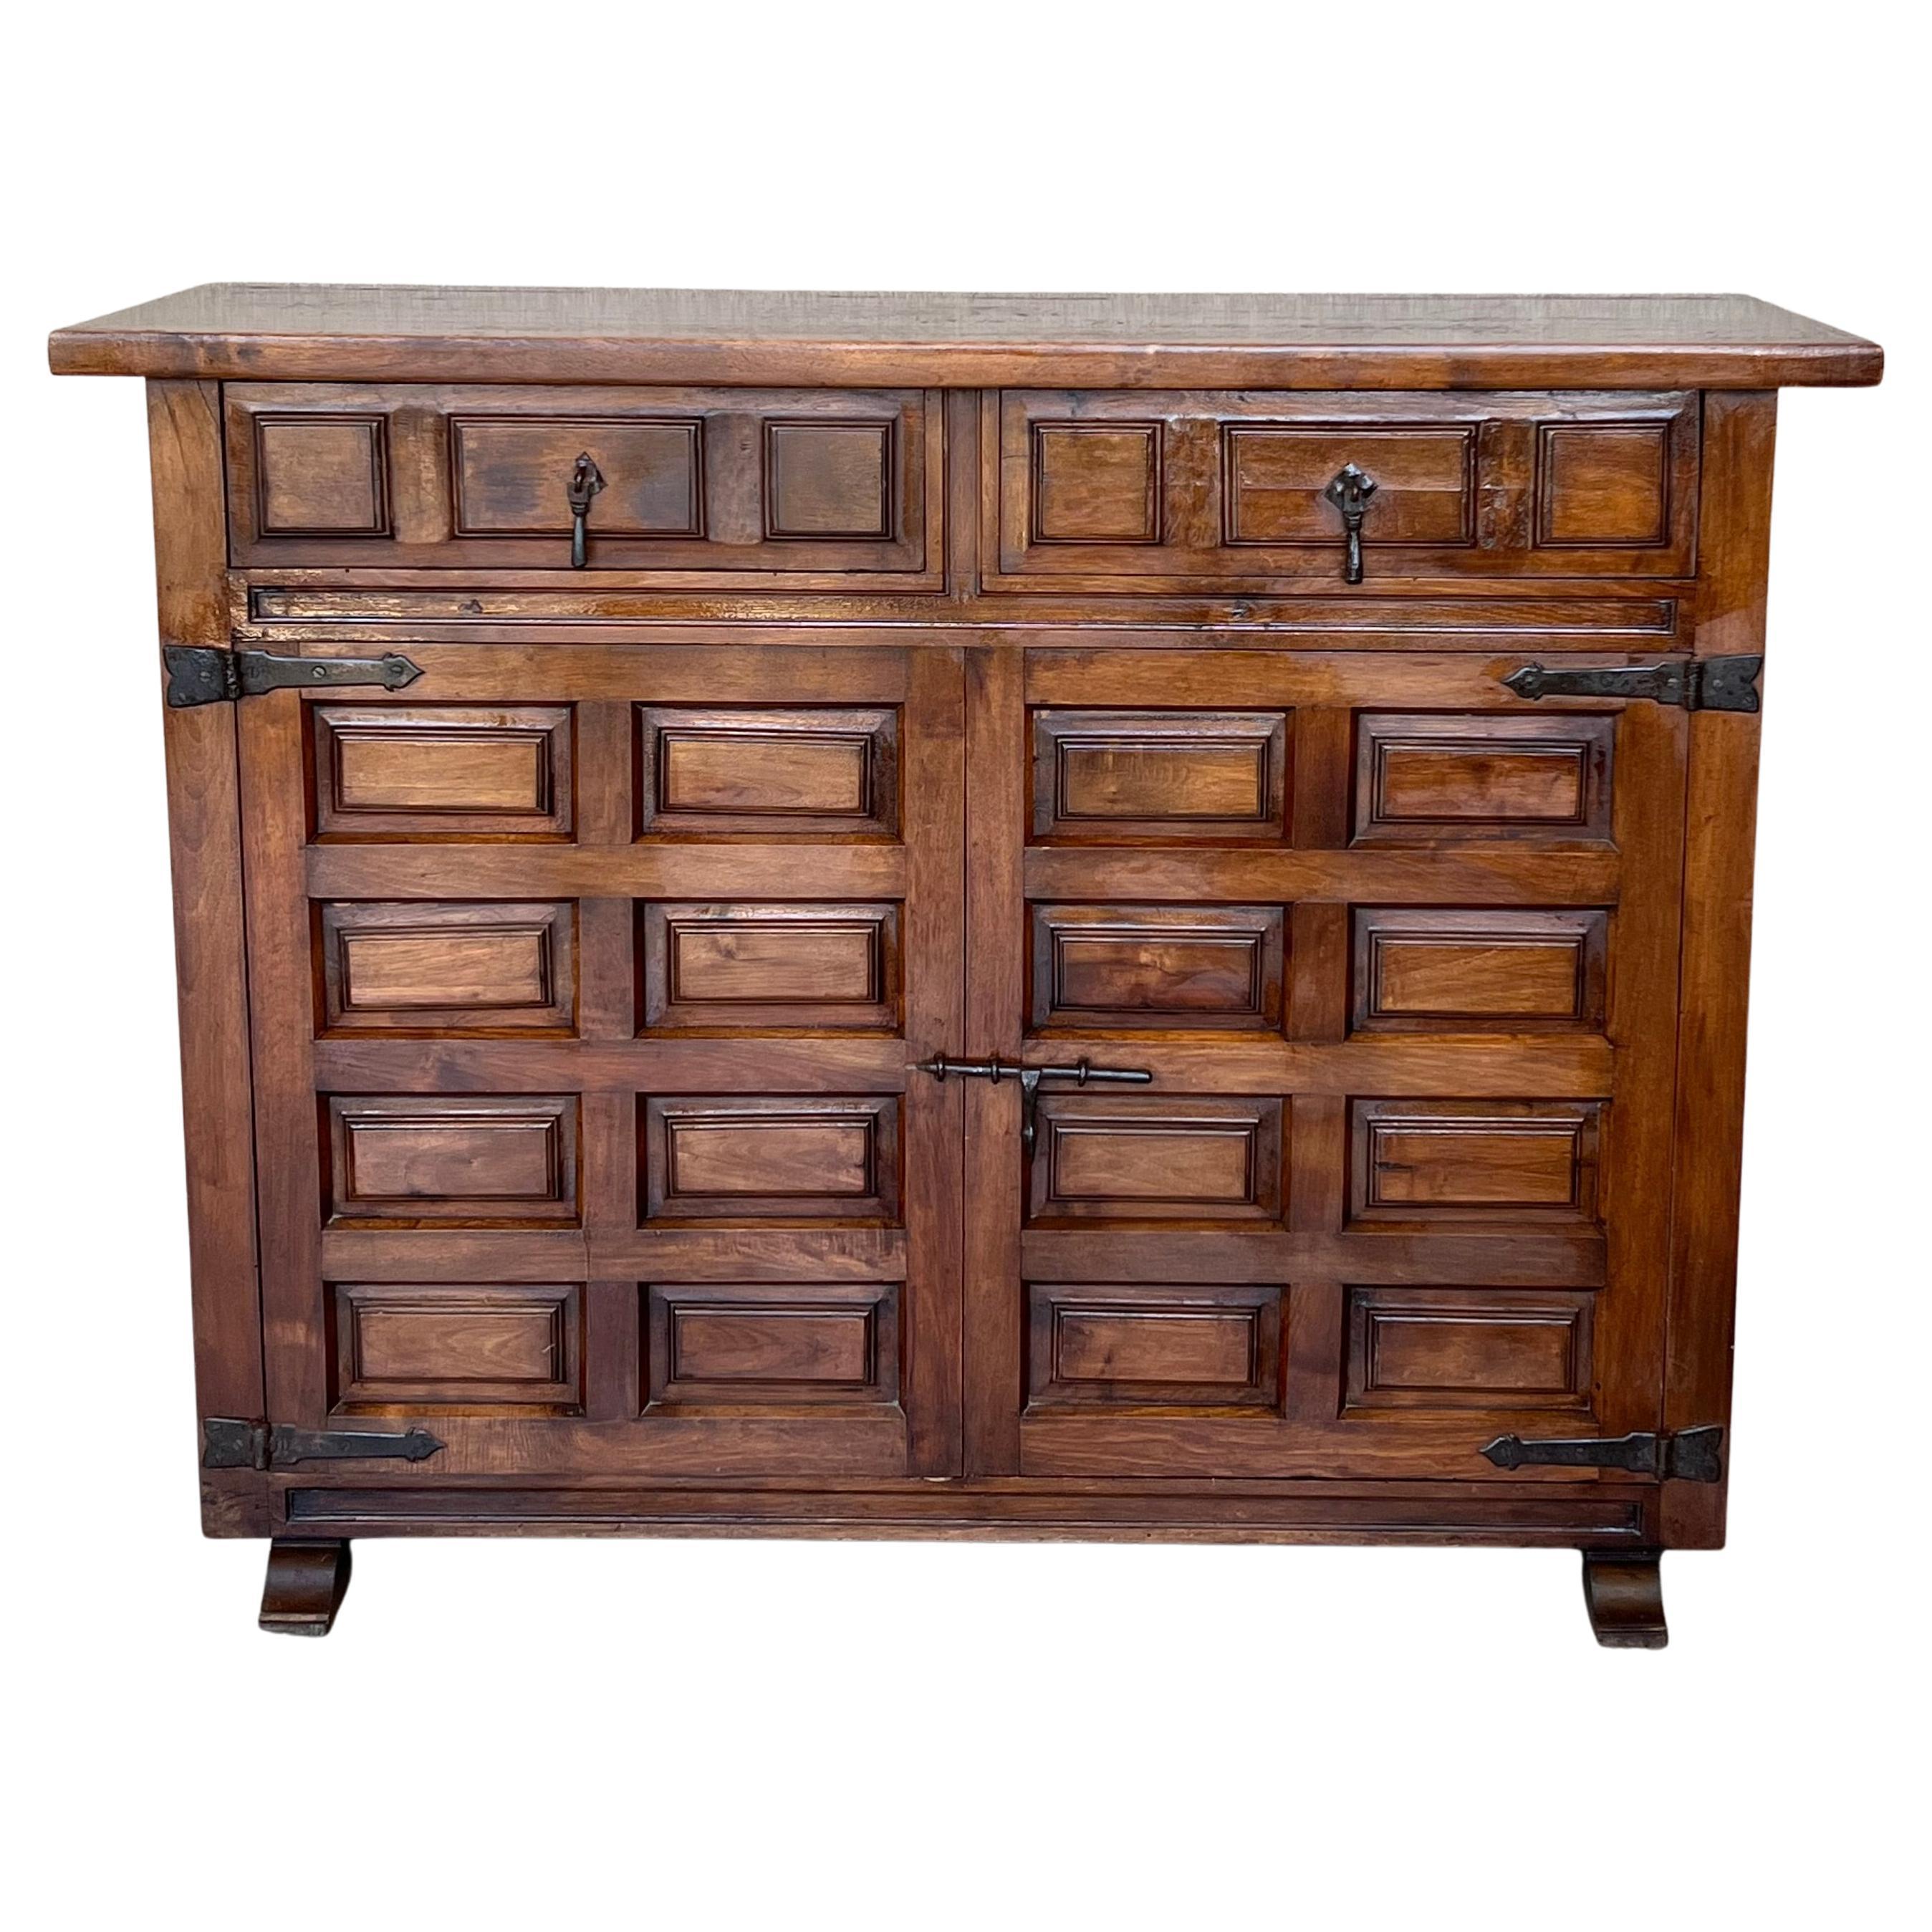 19th Catalan Spanish Baroque Carved Walnut Tuscan Two Drawers Credenza or Buffet For Sale